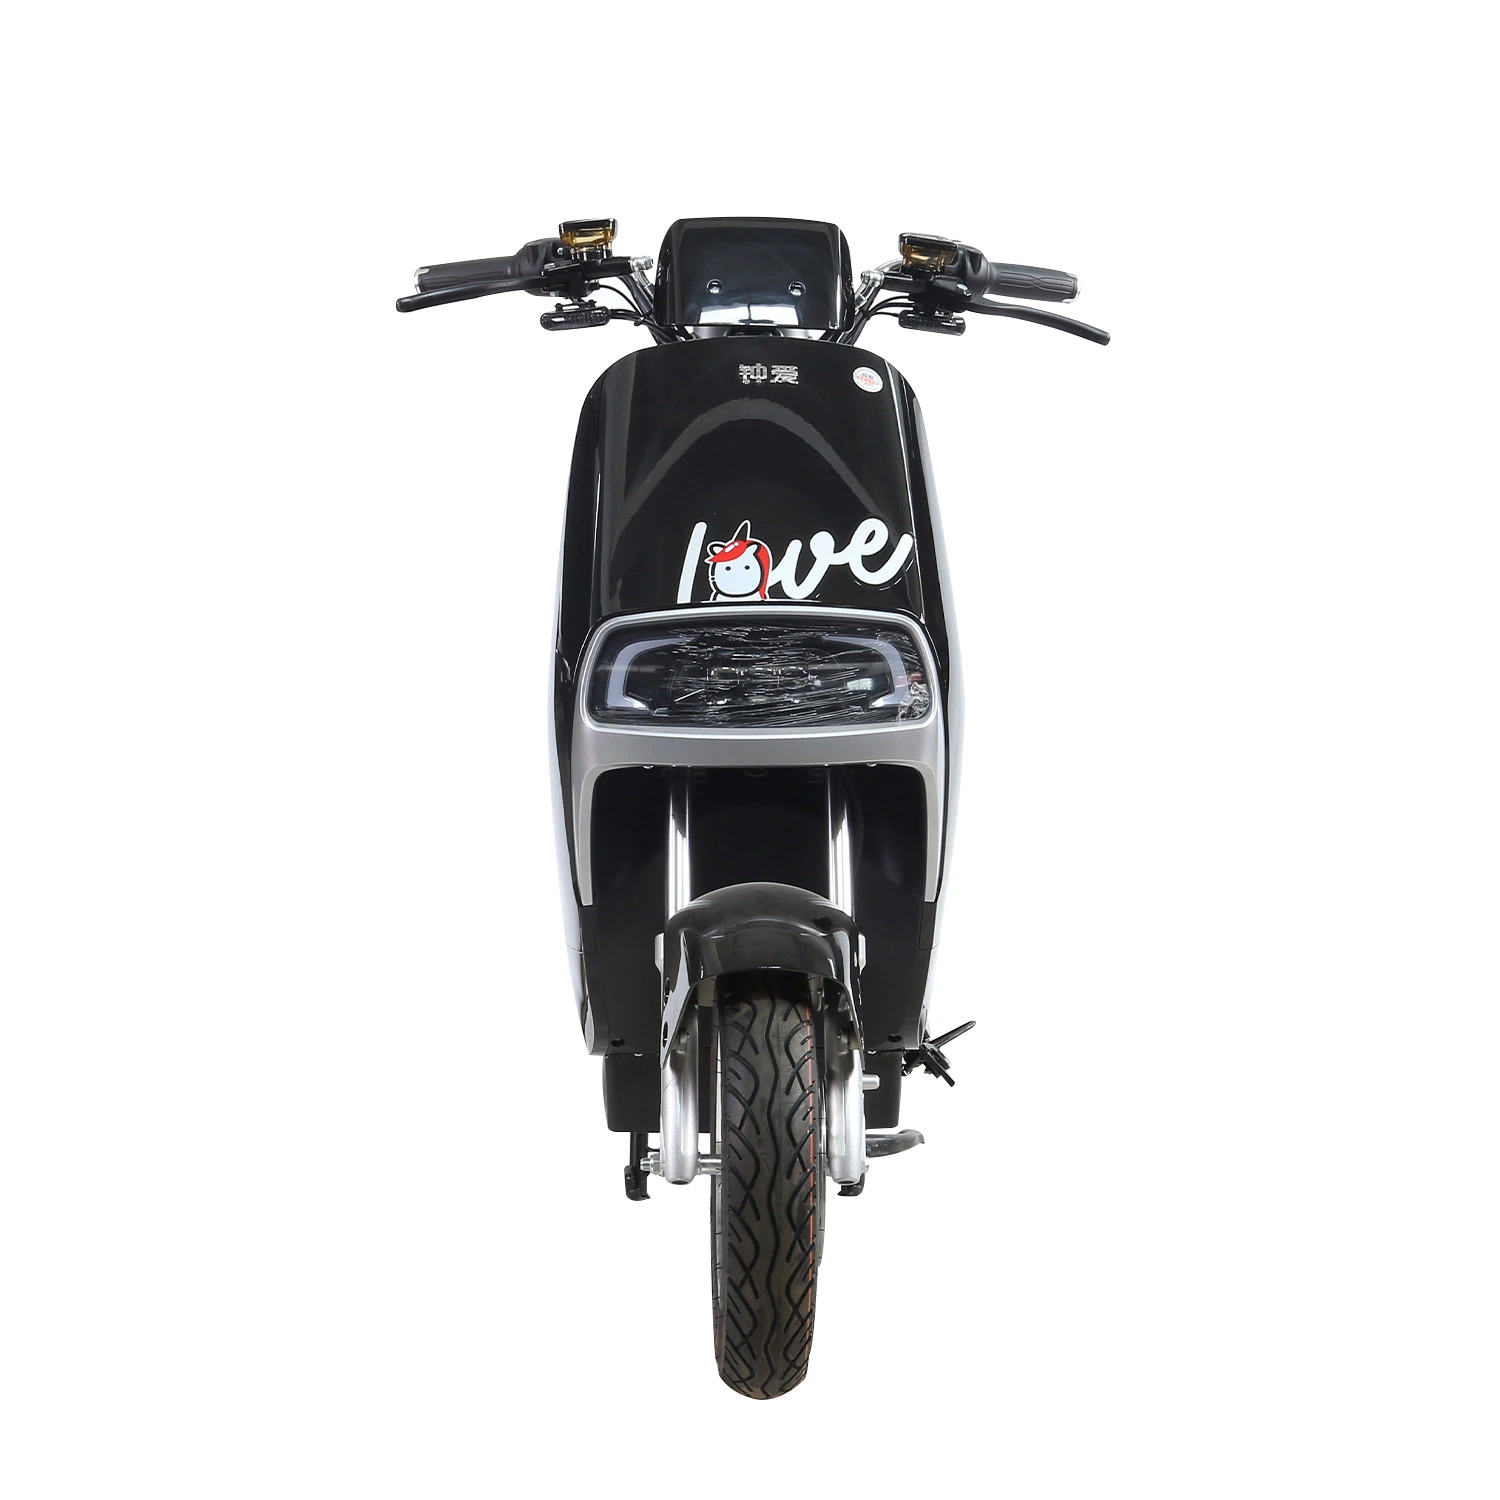 Punk Style New High Speed Super Power Long Range Scooter Dirt Bike Electric Motorcycle with Disc Brake